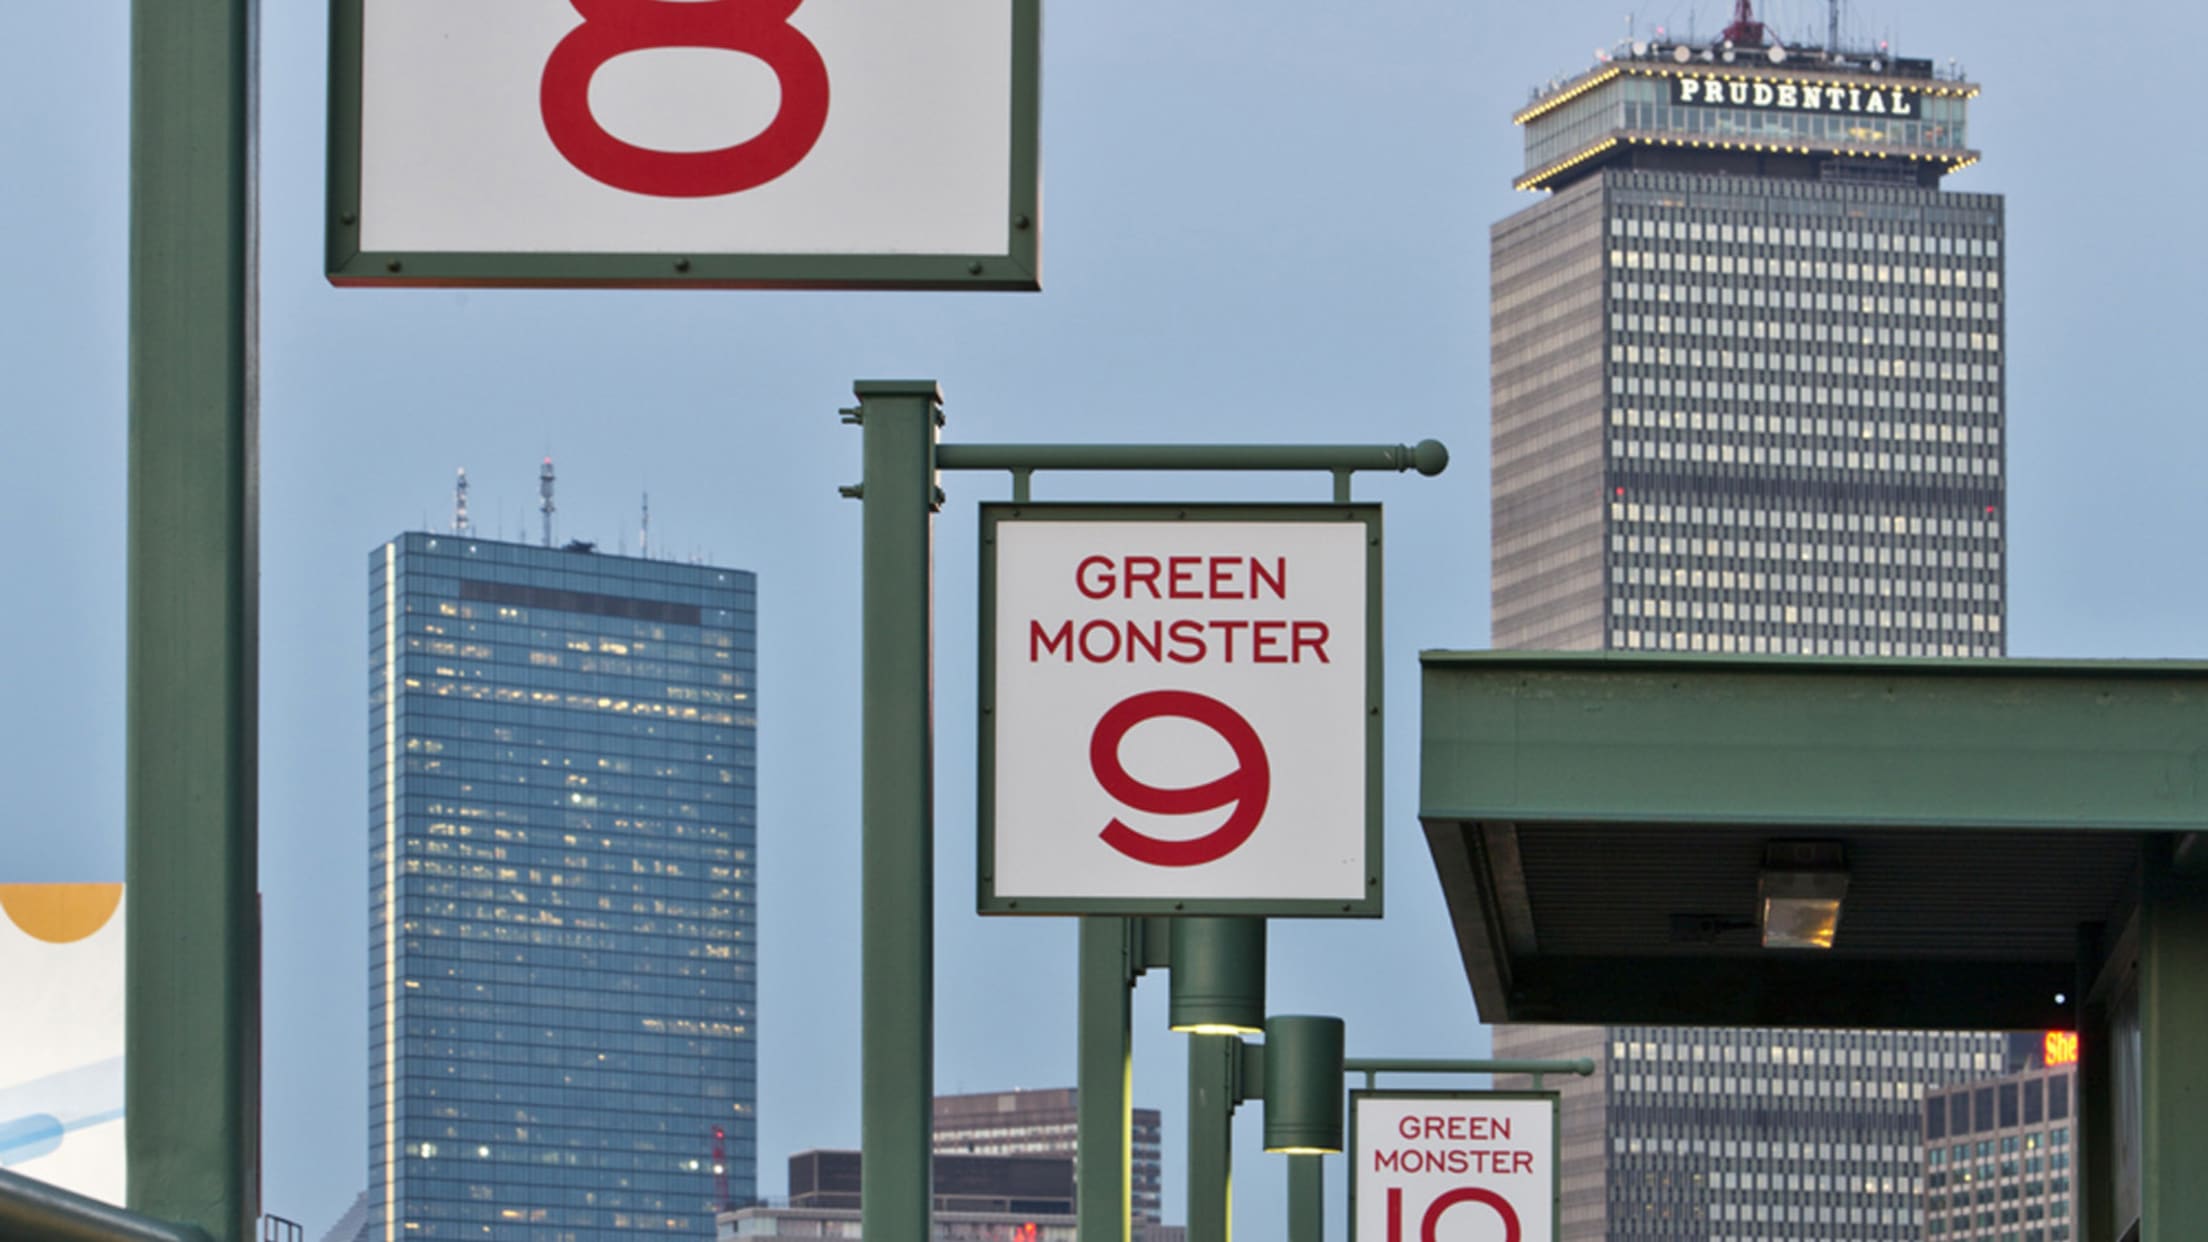 What is referred to as “The Green Monster” at Fenway Park? Why